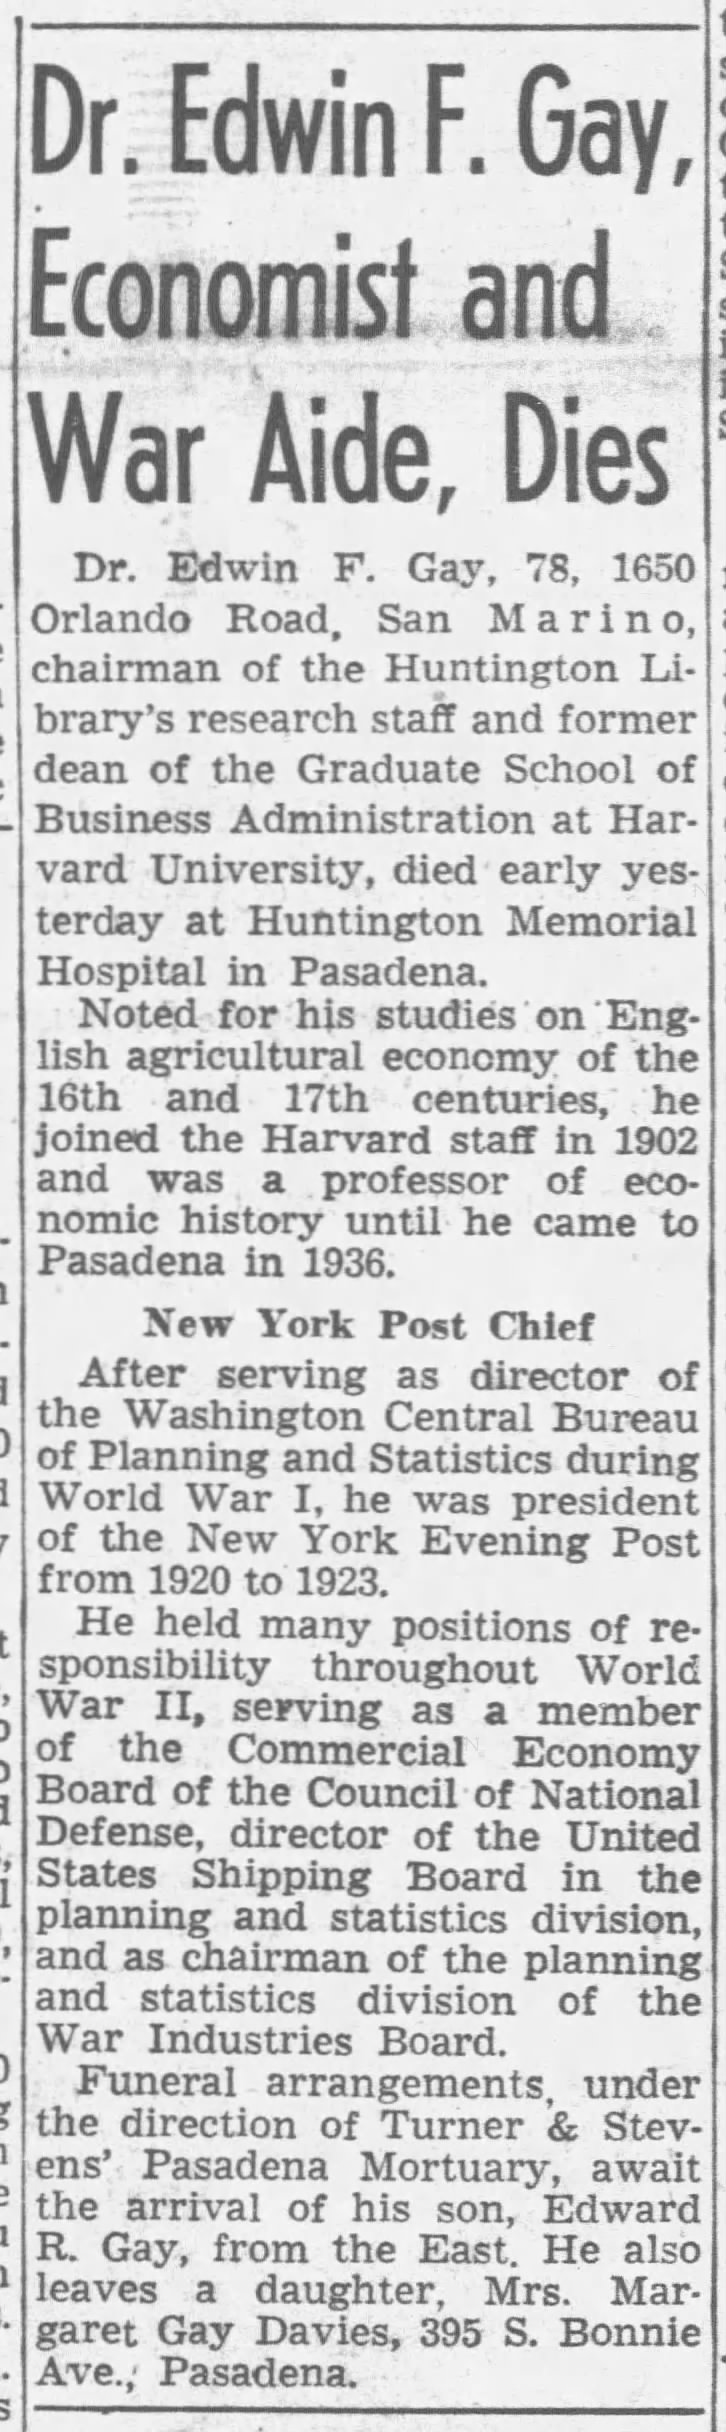 Dr. Edwin F. Gay, Economist and War Aide, Dies; 9 Feb 1946; Los Angeles Times; 1